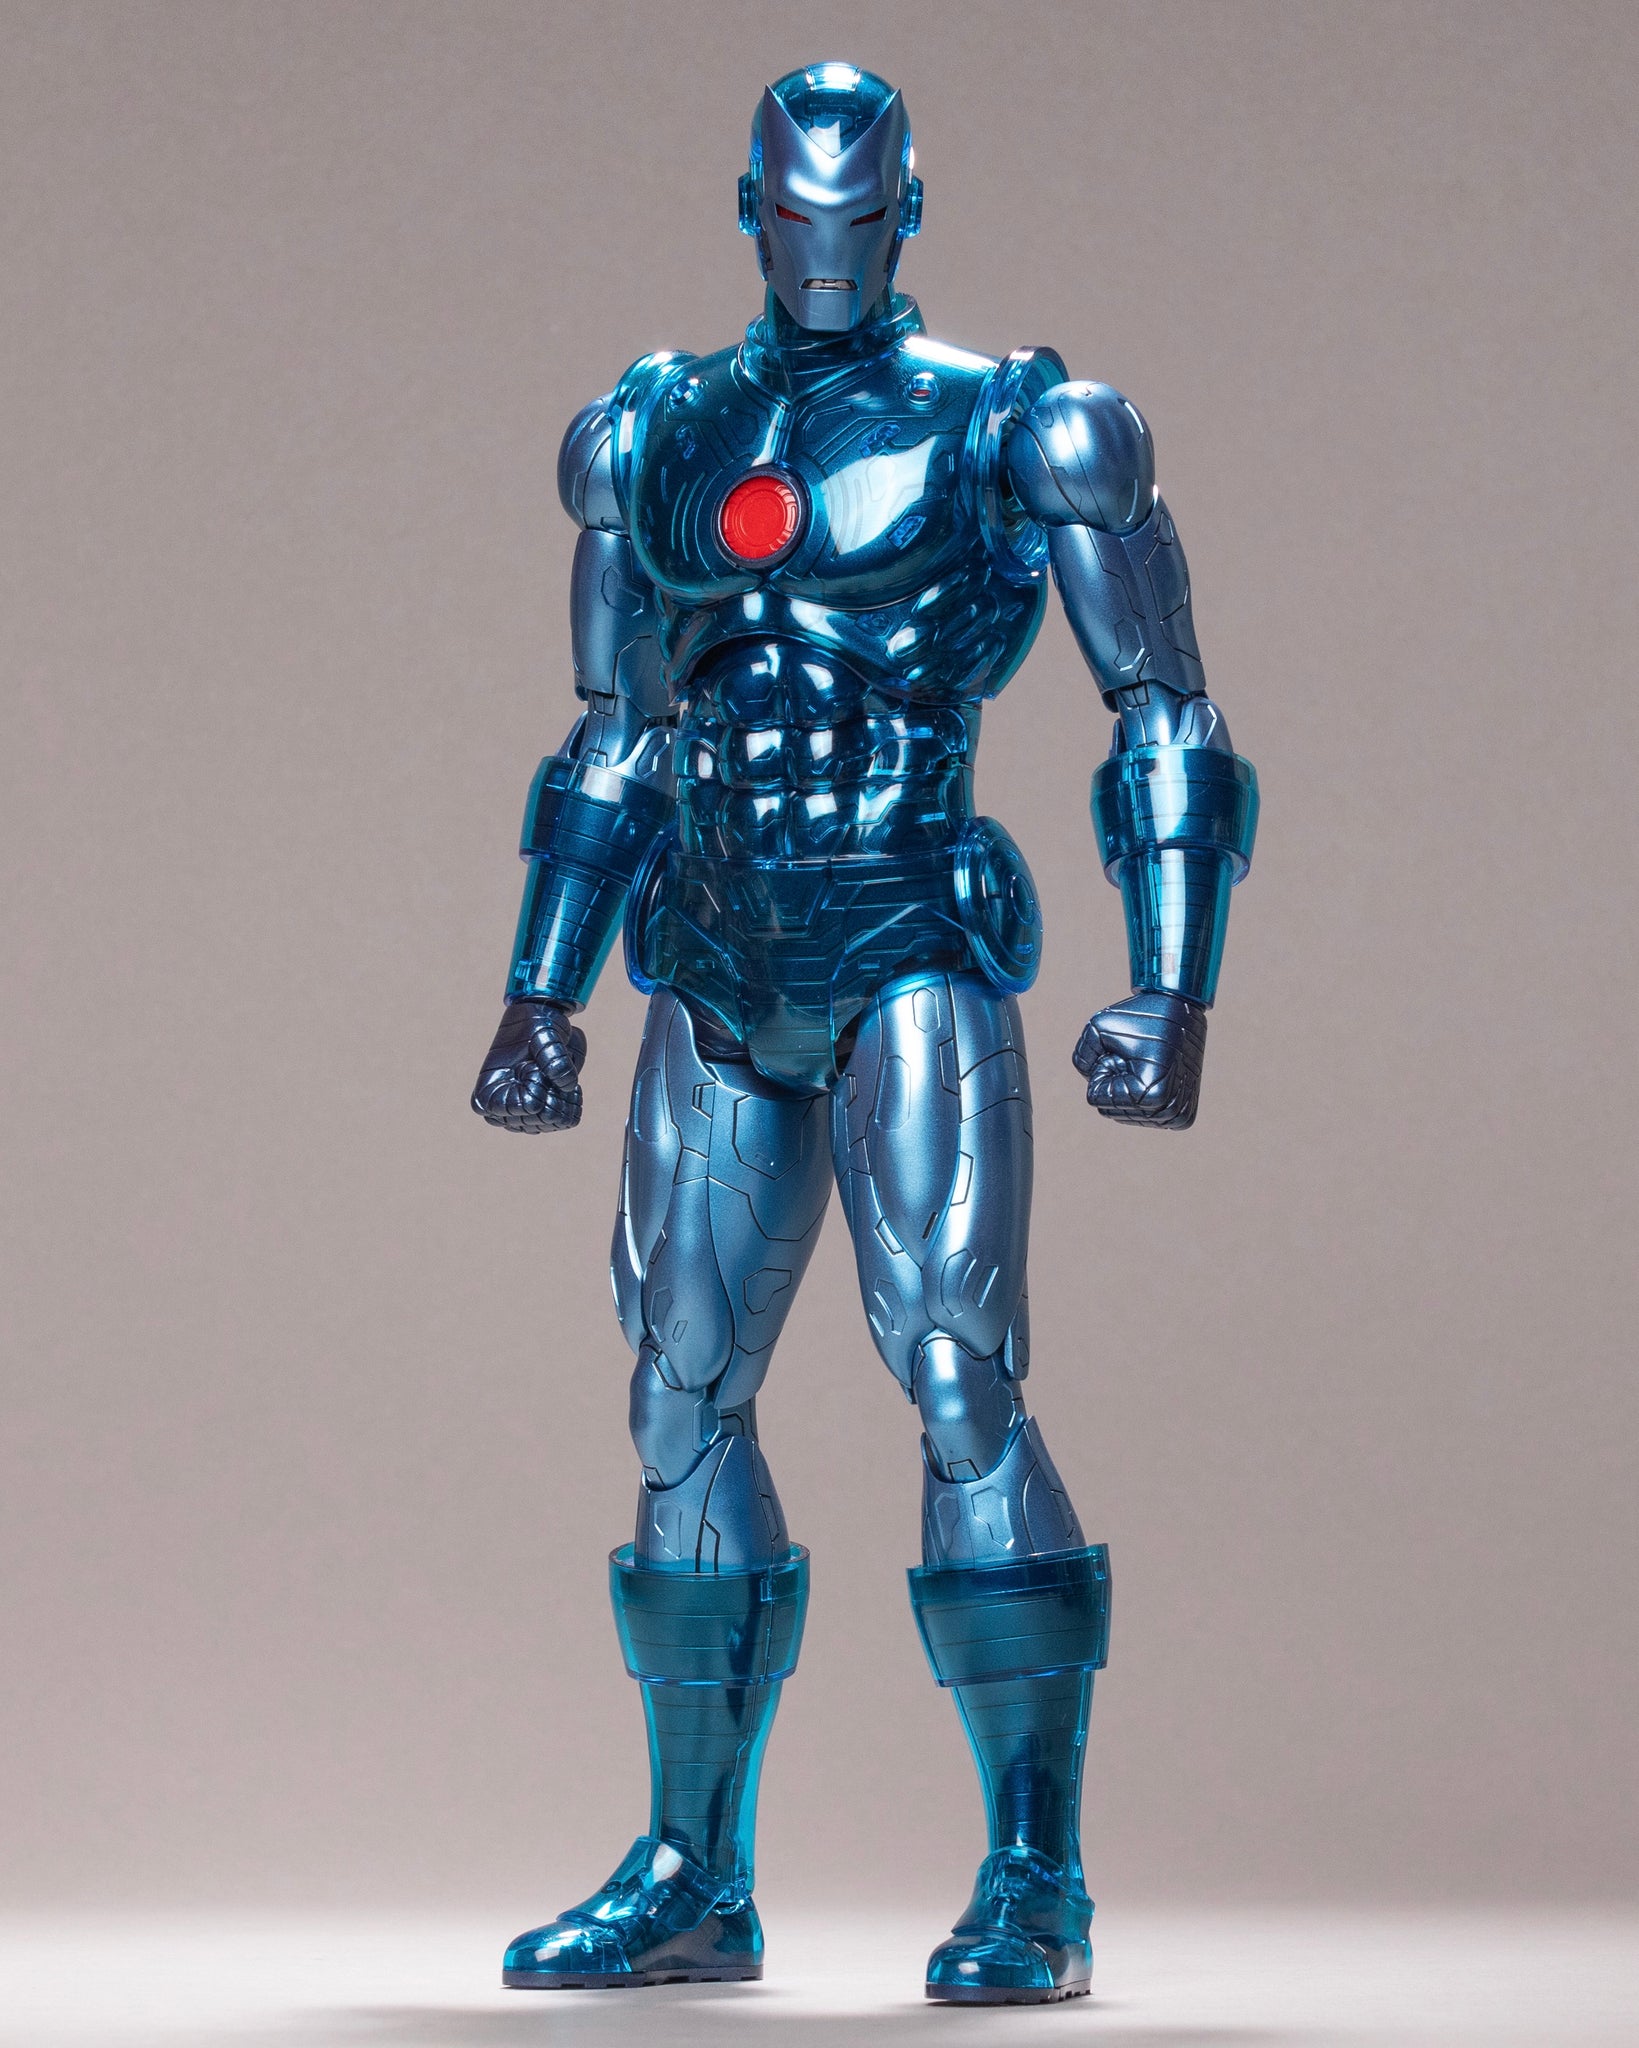 LCD 3D Printed and Magnetic Assembled Iron Man Action Figure - FacFox